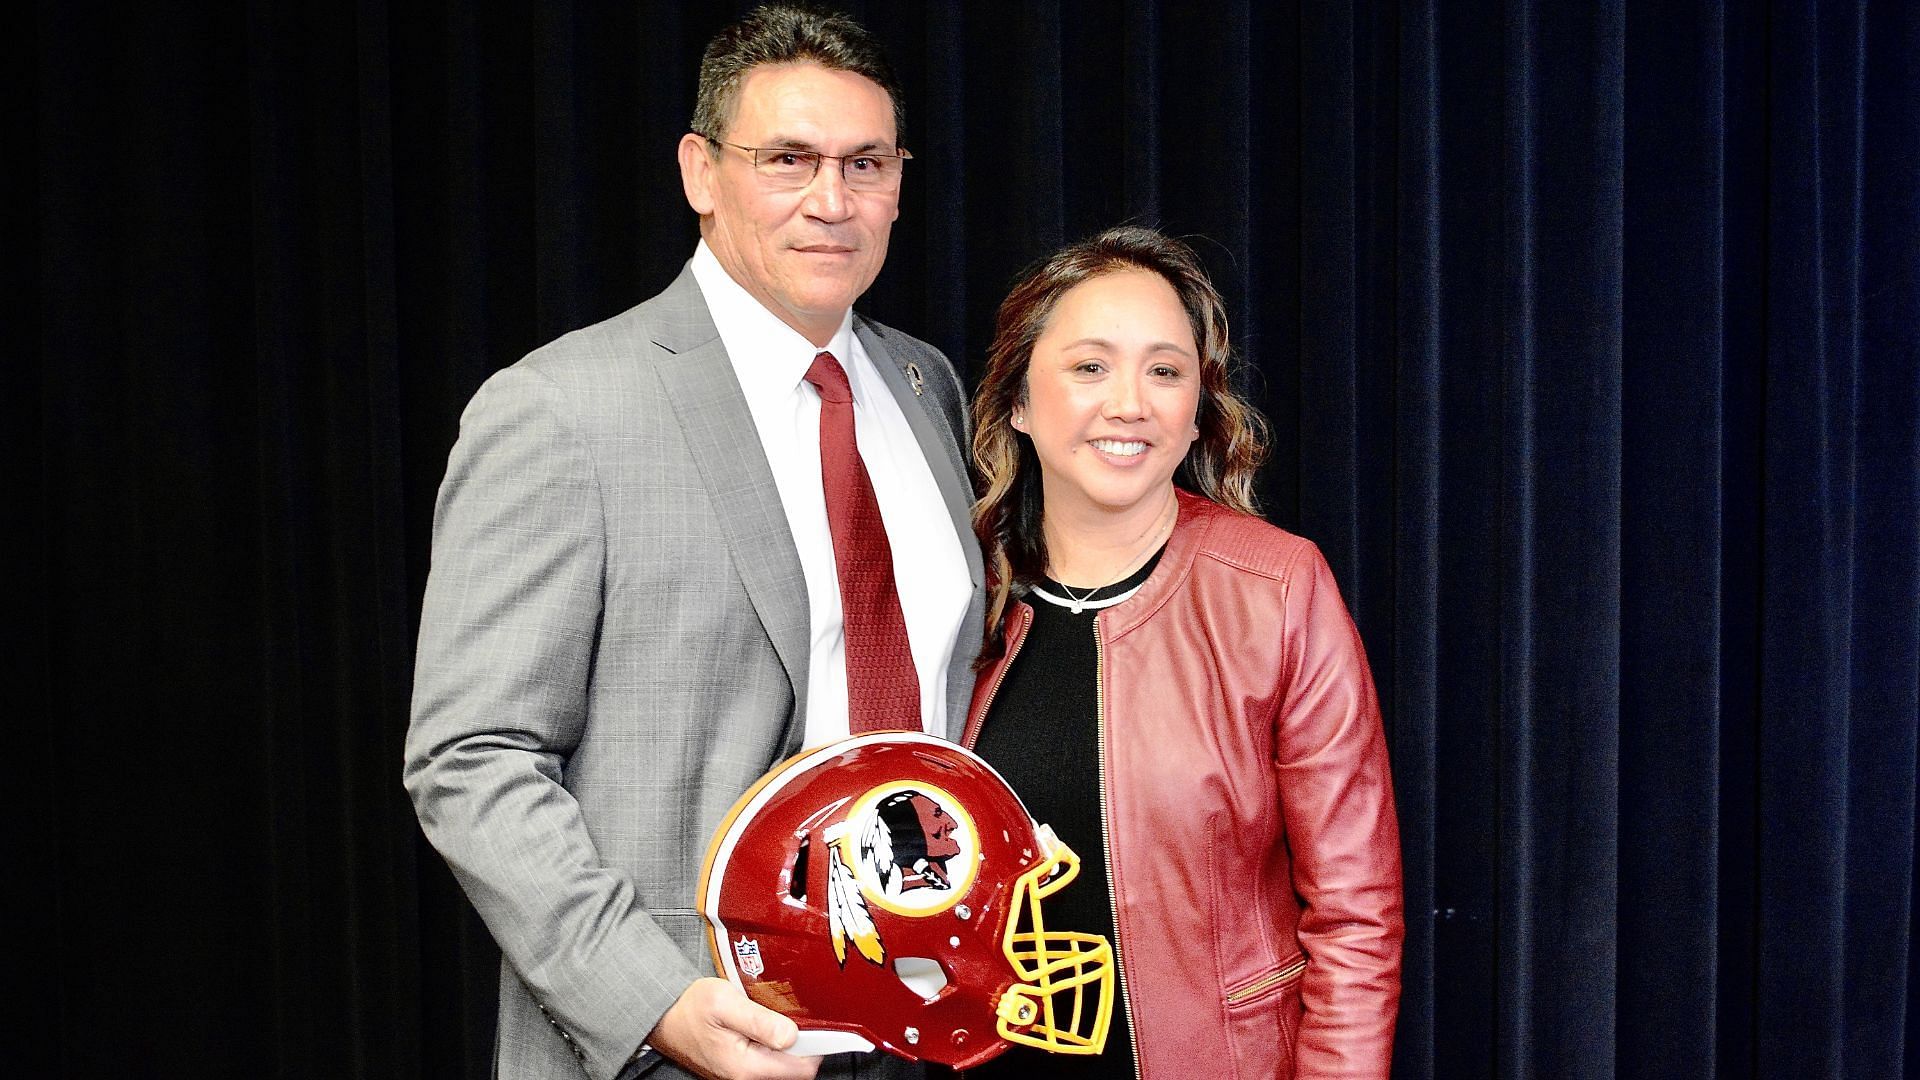 Washington Commanders head coach Ron Rivera with his wife, Stephanie. (Image credit: All Pro Reels on Flickr)